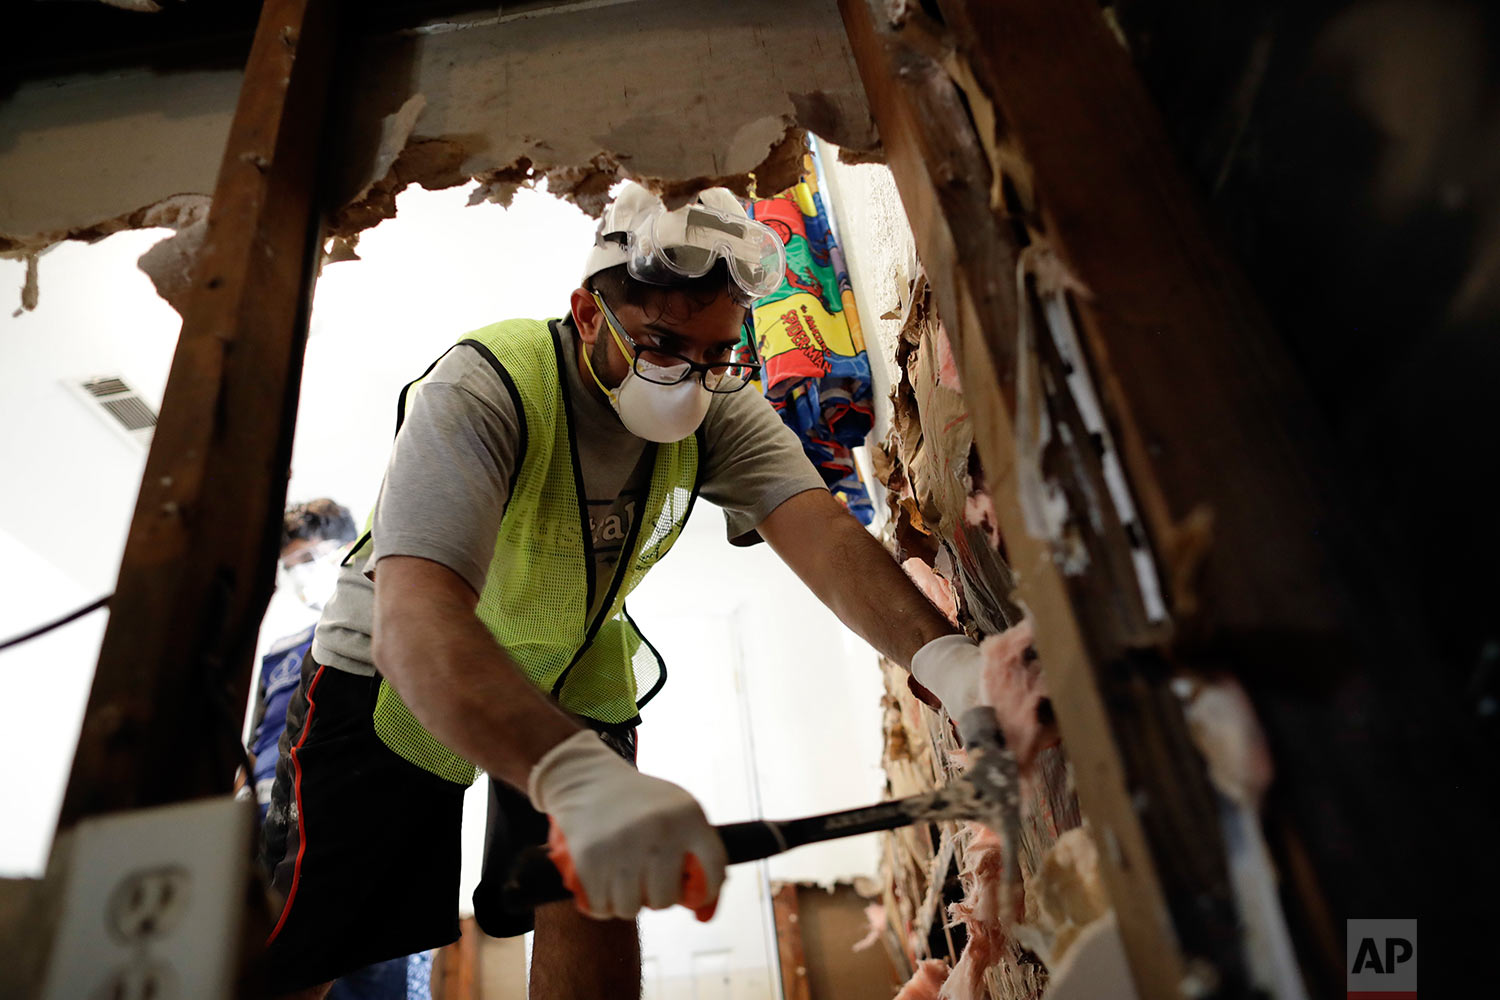  In this Sunday, Sept. 3, 2017, photo, volunteer Hashir Ayubi, of the the Ahmadiyya Muslim Youth Association helps clean out a flood-damaged home in Houston. (AP Photo/Gregory Bull) 